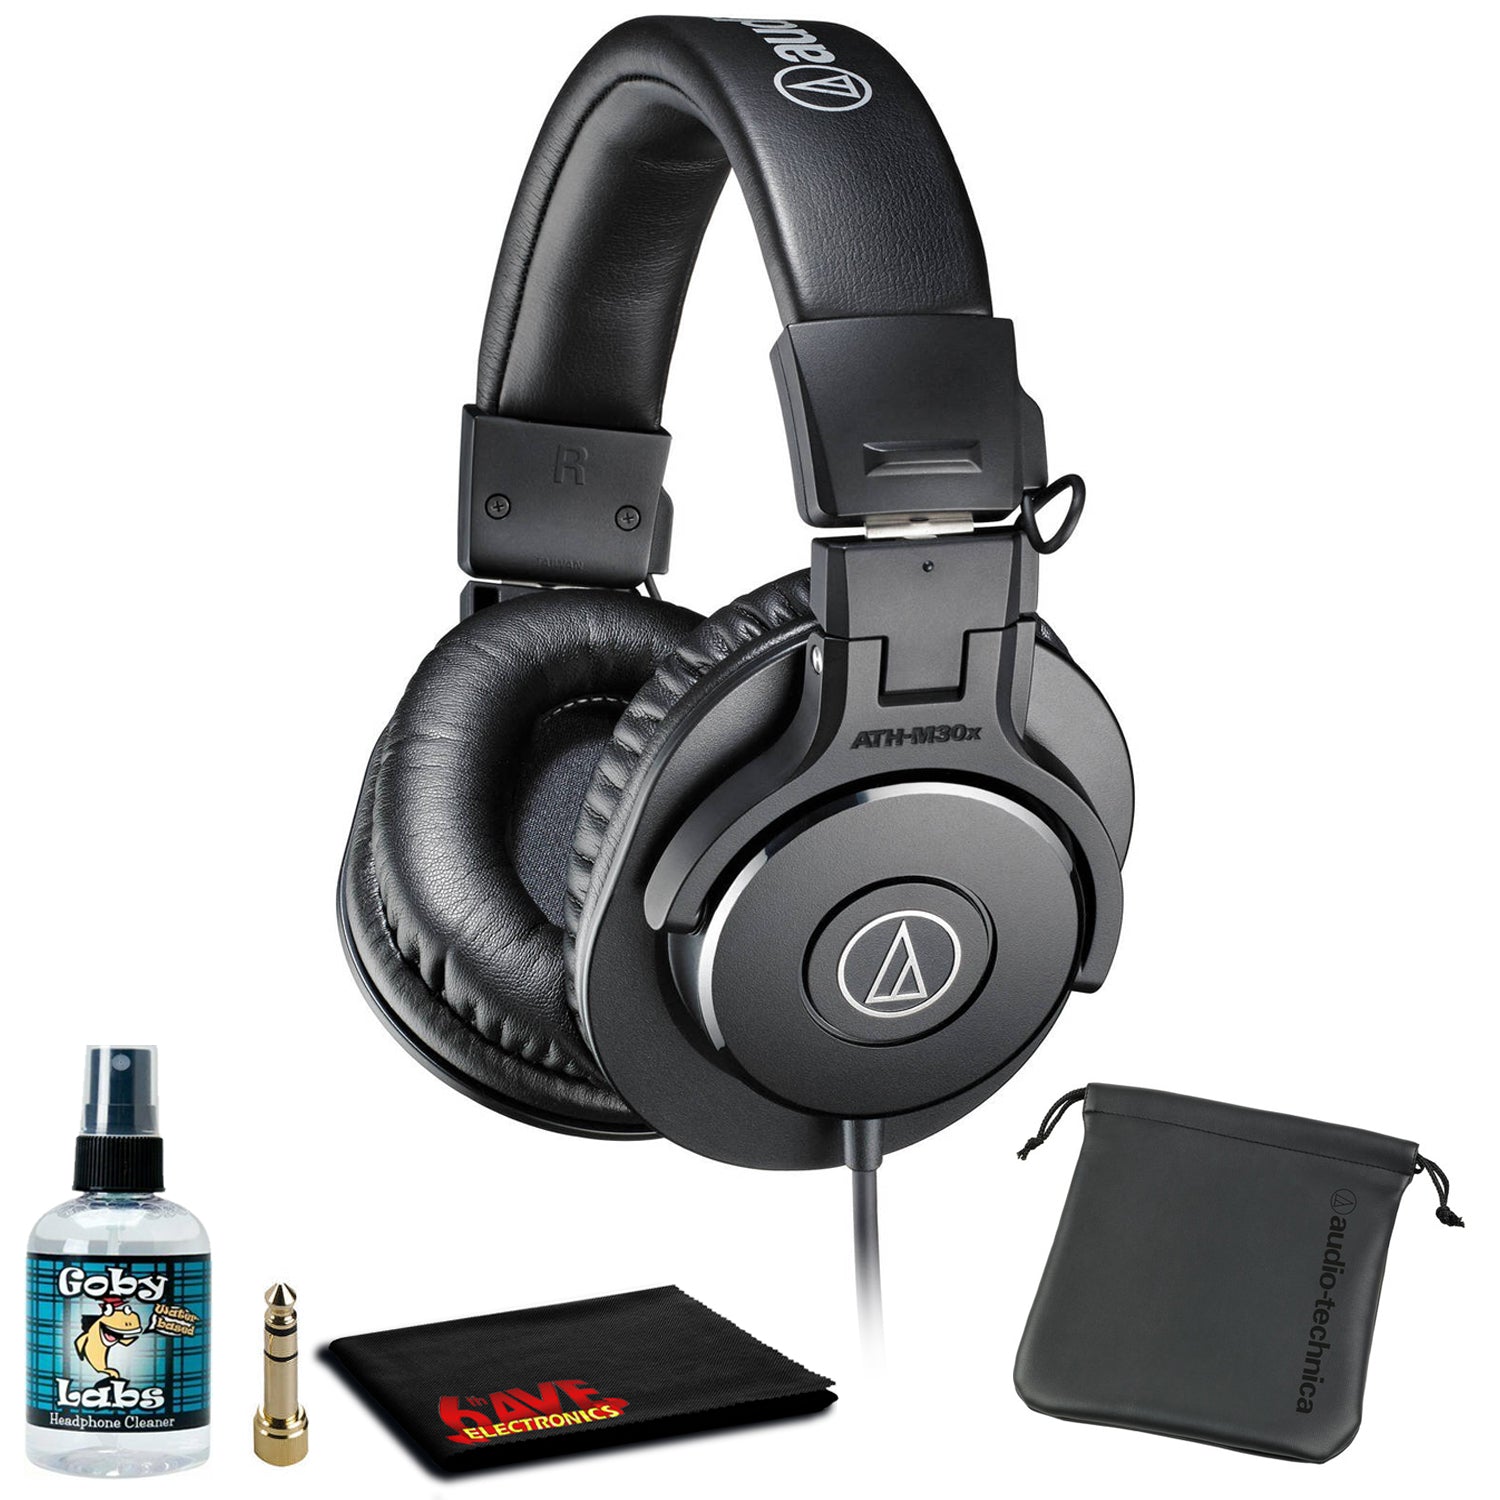 Audio-Technica ATH-M30x Closed Back Headphones with Pouch and Cleaning Kit